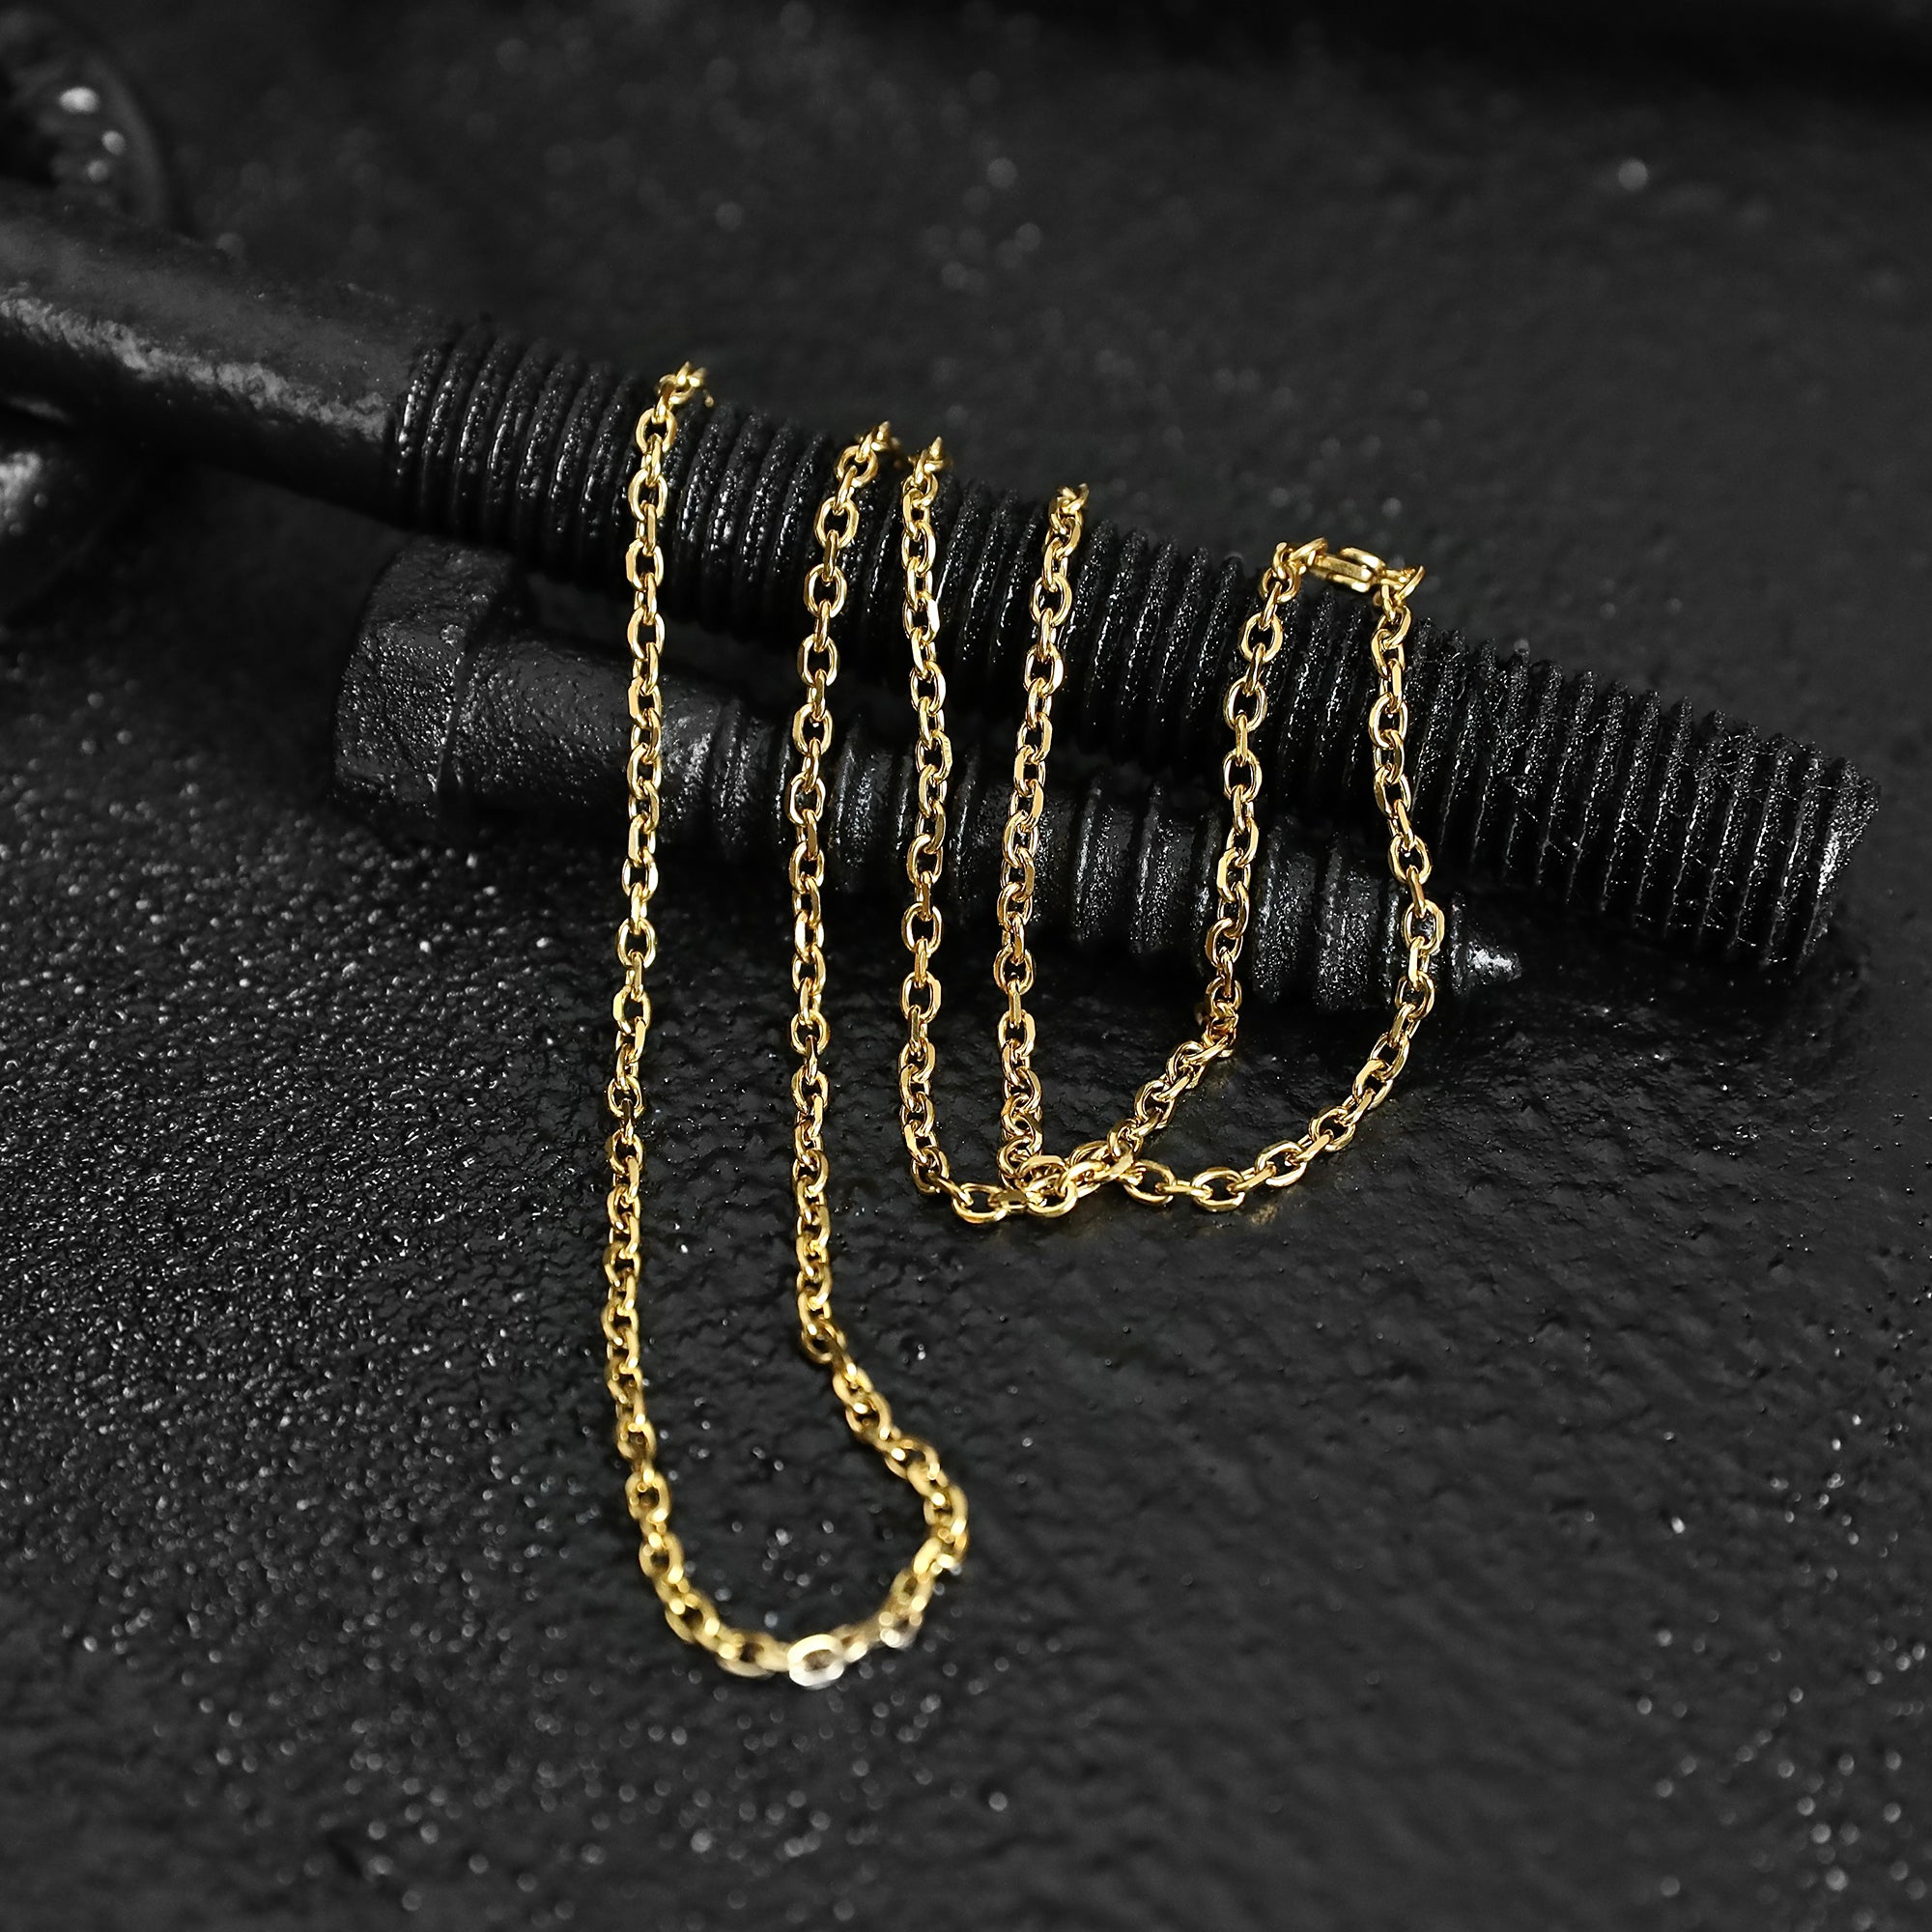 Modern Cable Chain Necklace - Gold 3mm